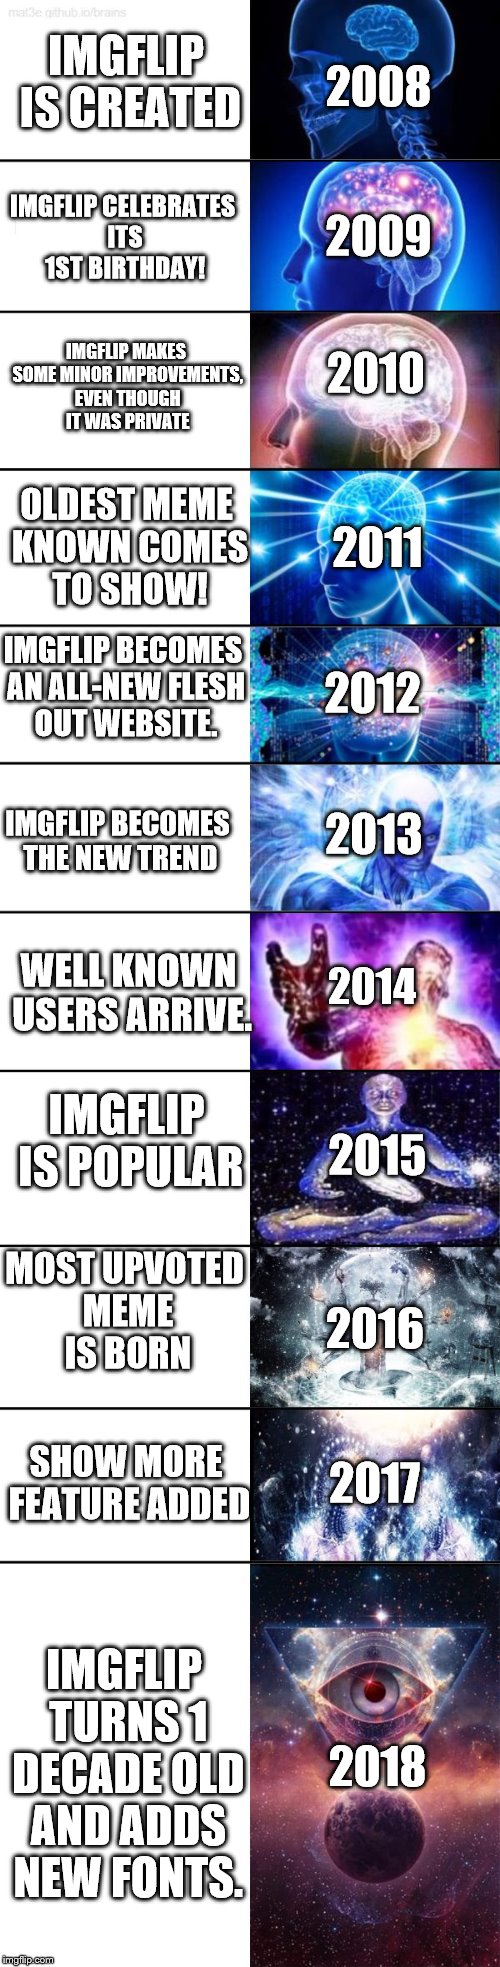 The Timeline of Imgflip (REUPLOAD) | IMGFLIP IS CREATED; 2008; IMGFLIP CELEBRATES ITS 1ST BIRTHDAY! 2009; IMGFLIP MAKES SOME MINOR IMPROVEMENTS, EVEN THOUGH IT WAS PRIVATE; 2010; OLDEST MEME KNOWN COMES TO SHOW! 2011; IMGFLIP BECOMES AN ALL-NEW FLESH OUT WEBSITE. 2012; 2013; IMGFLIP BECOMES THE NEW TREND; WELL KNOWN USERS ARRIVE. 2014; IMGFLIP IS POPULAR; 2015; MOST UPVOTED MEME IS BORN; 2016; SHOW MORE FEATURE ADDED; 2017; 2018; IMGFLIP TURNS 1 DECADE OLD AND ADDS NEW FONTS. | image tagged in extended expanding brain,imgflip,meanwhile on imgflip,time,timeline,memes | made w/ Imgflip meme maker